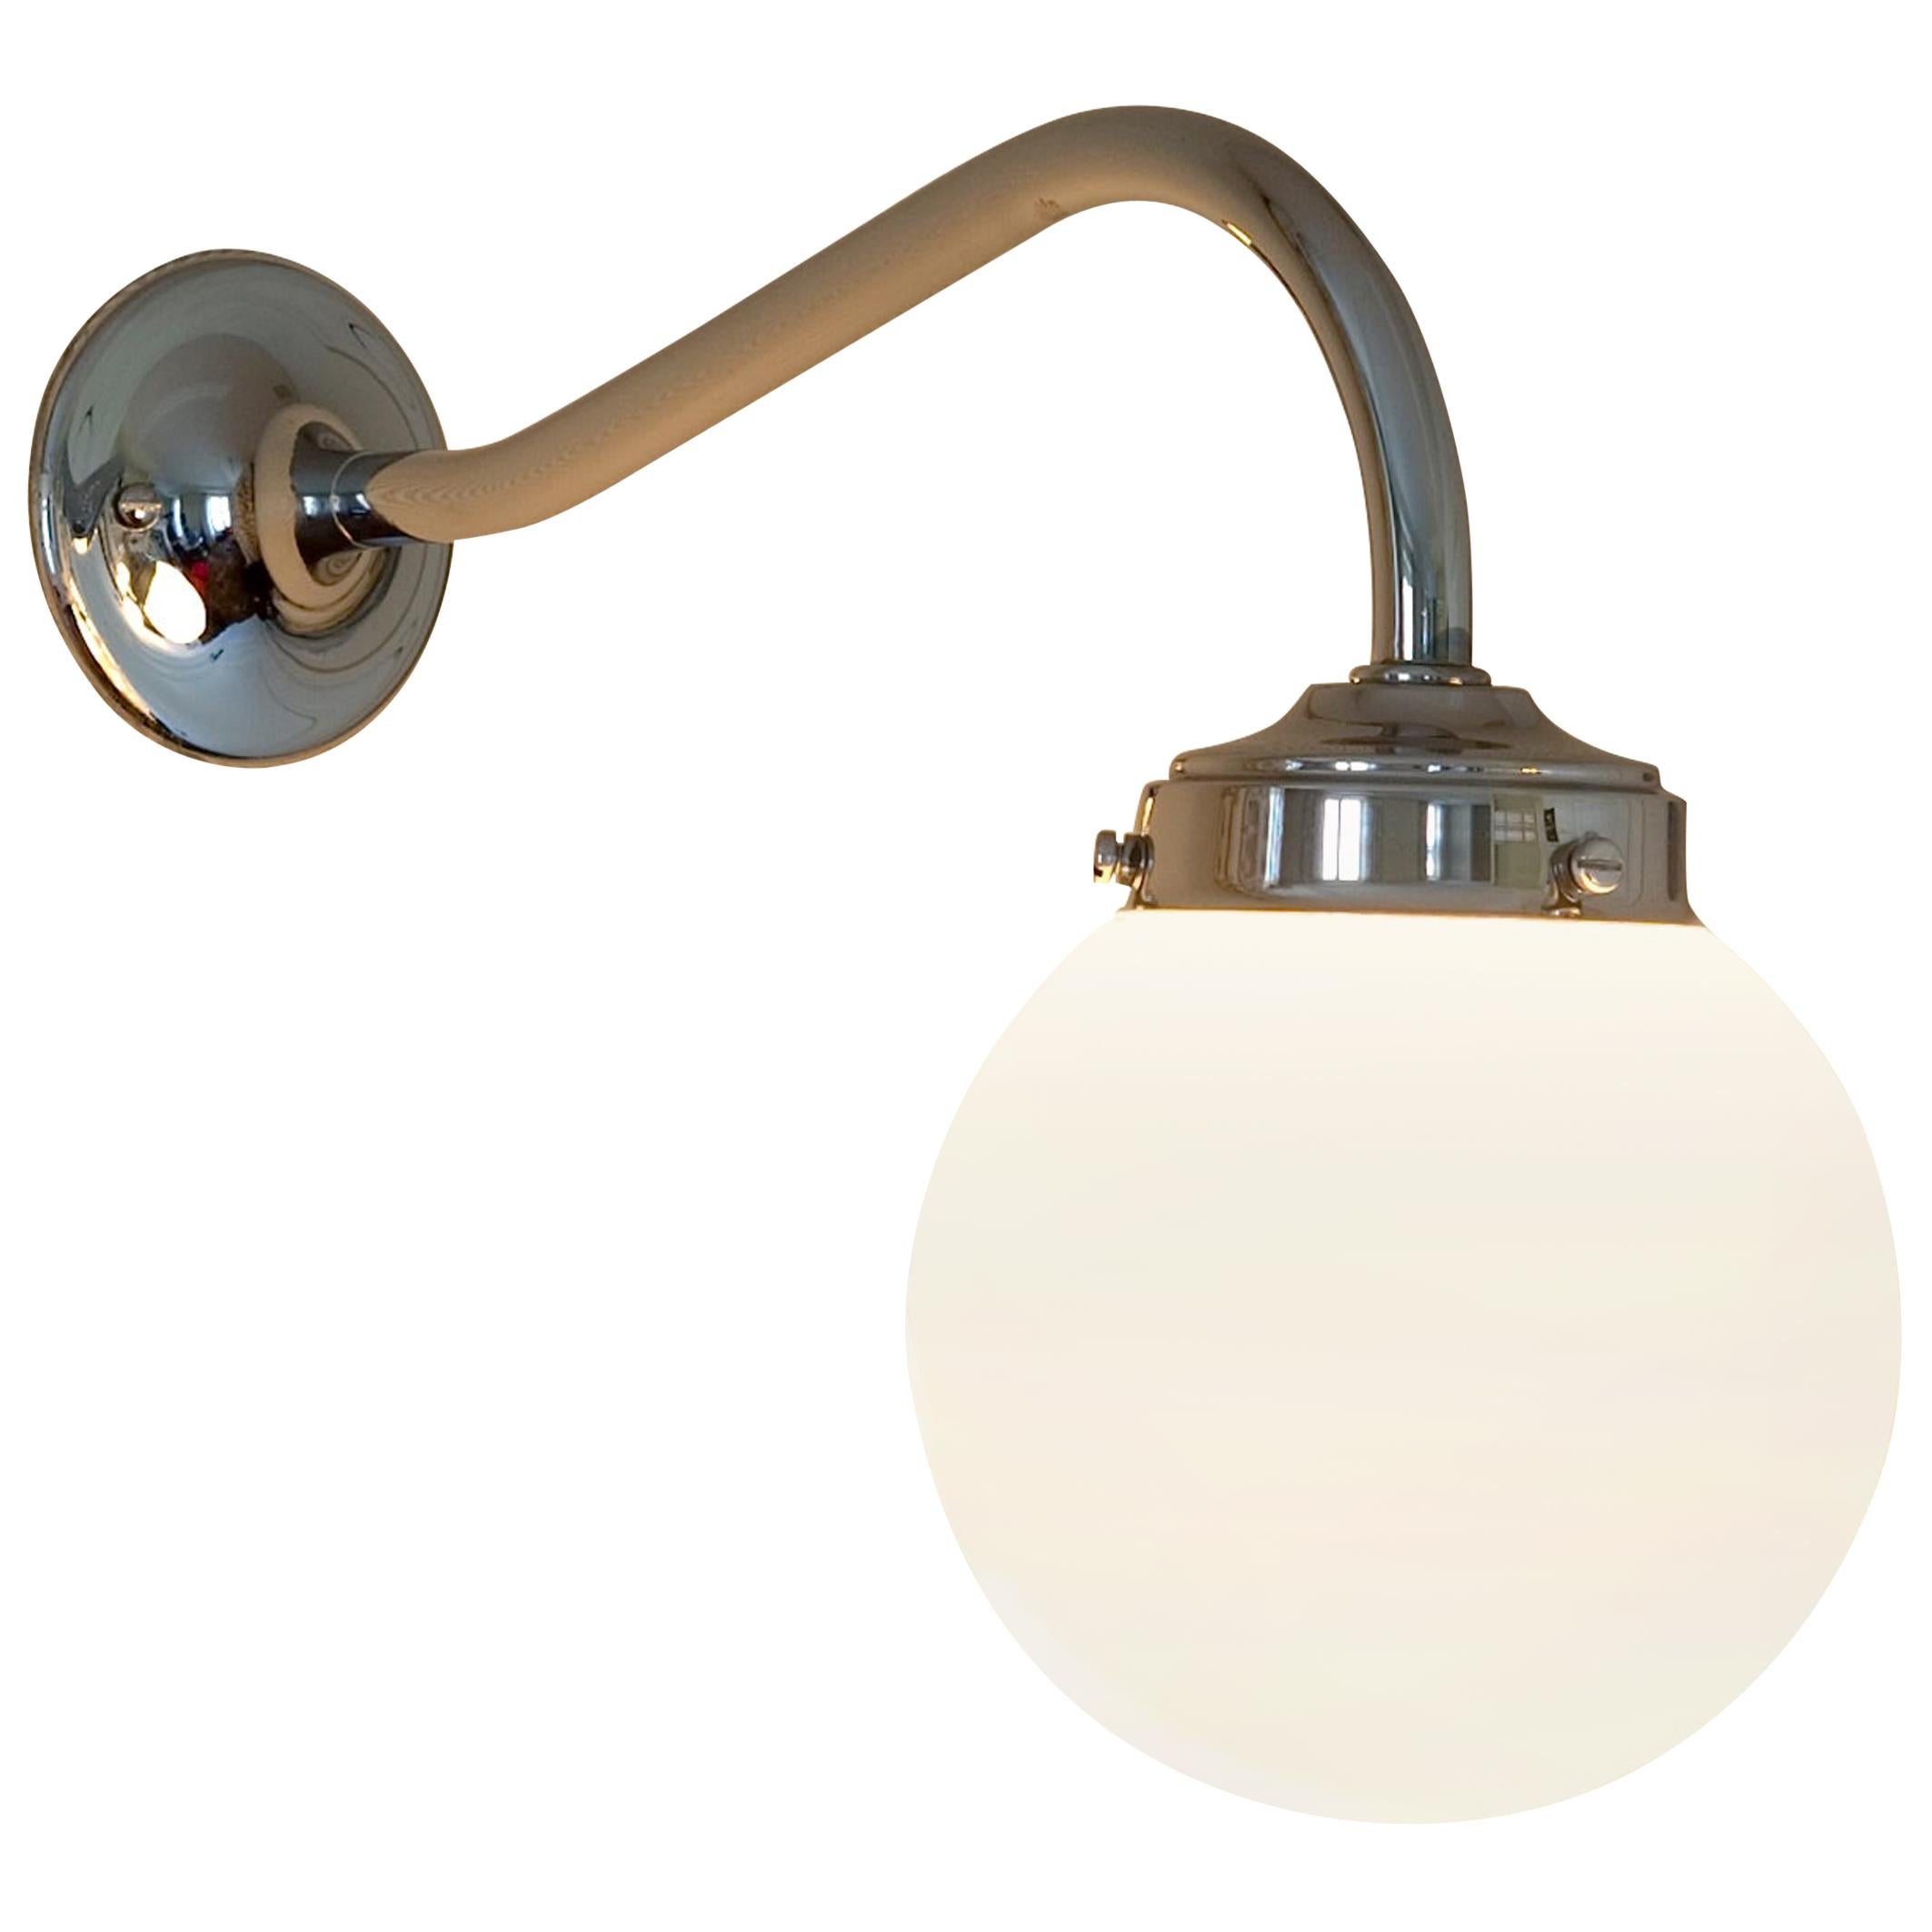 Tekna Clovelly Wall Light with Polished Nickel Finish For Sale